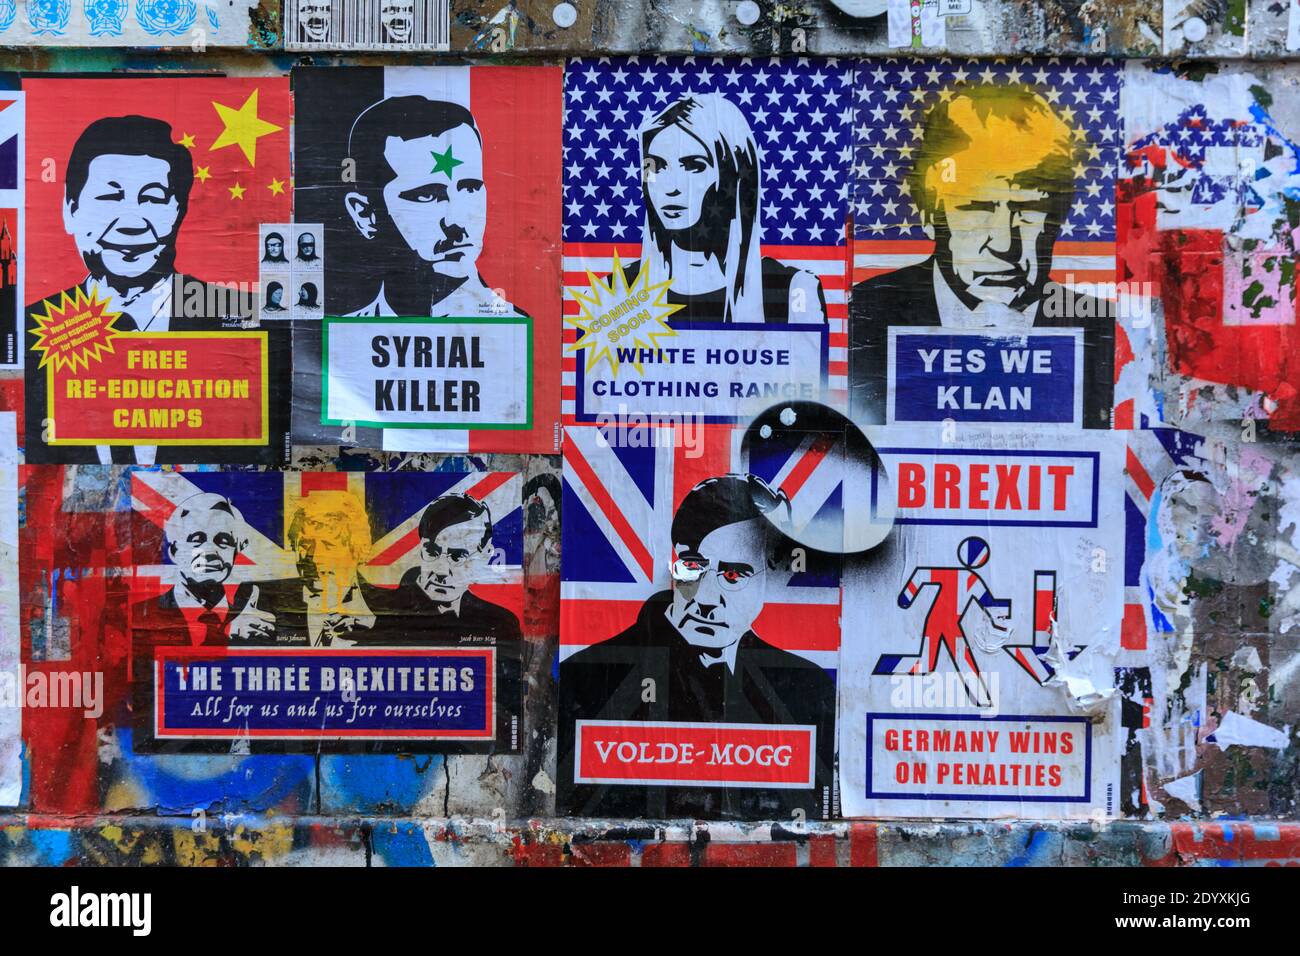 Posters, stickers and political graffiti commenting Brexit, Trump and international politics, Brick Lane, East London, England Stock Photo